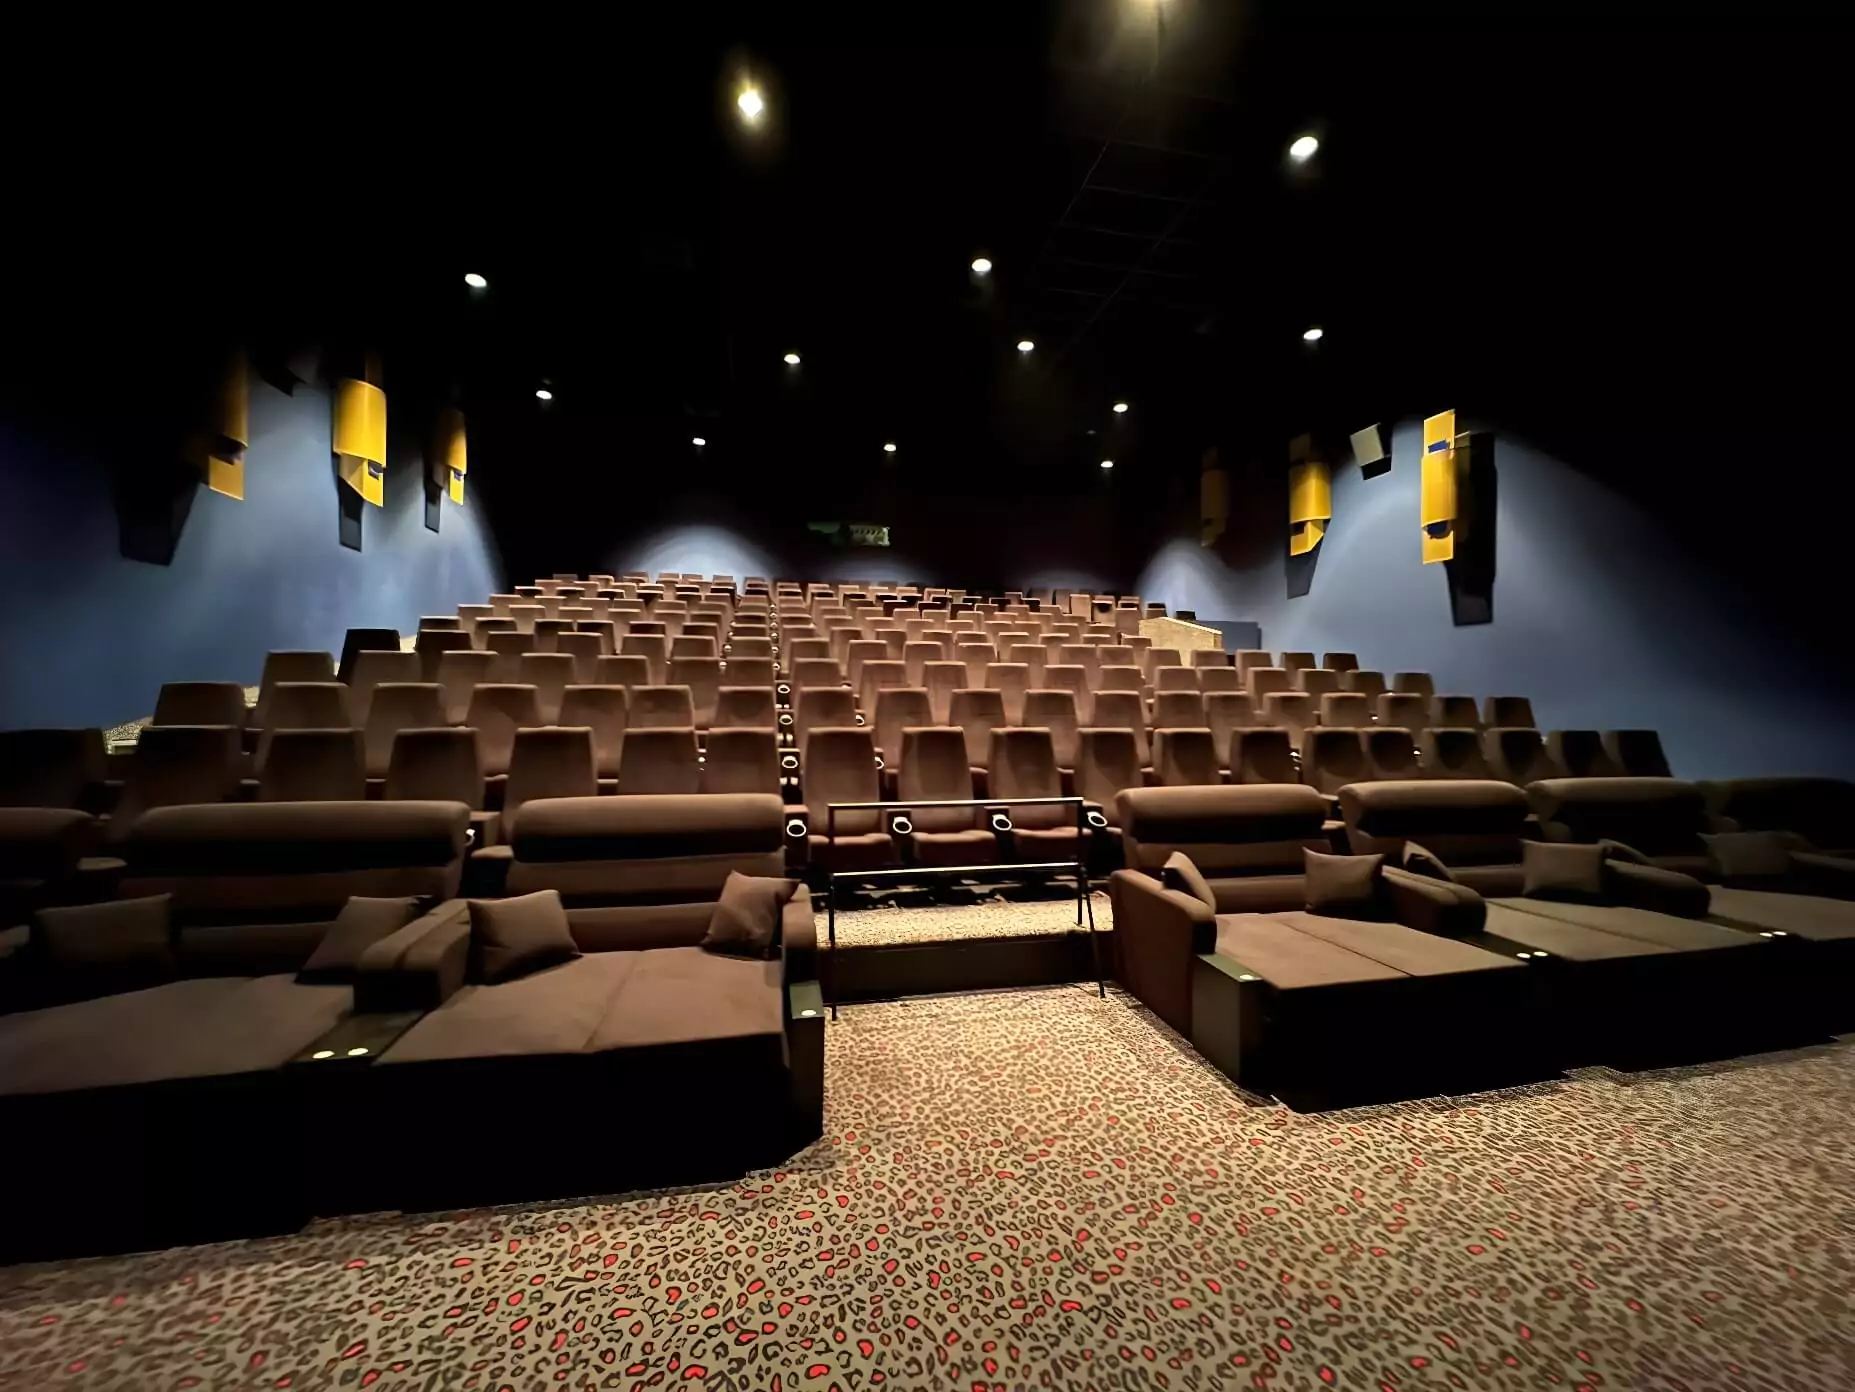 Cinema Seating Supplier located in Europe